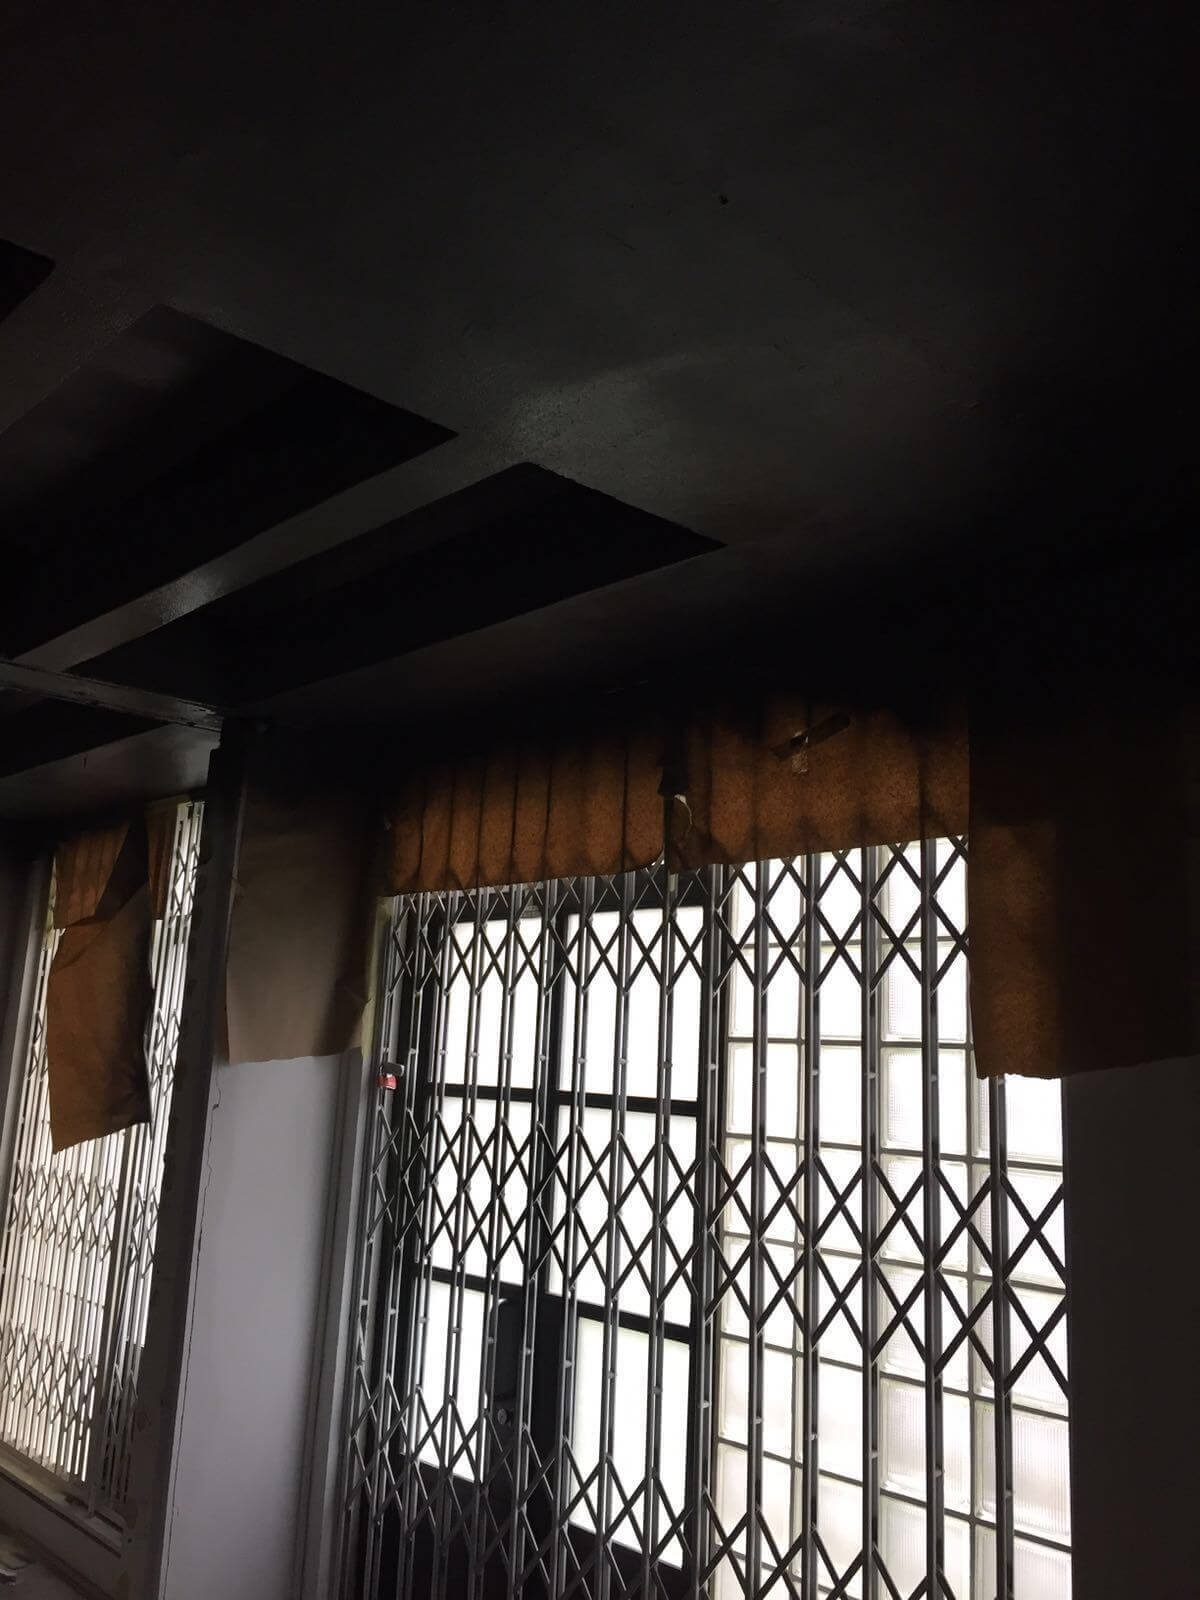 Fire Proof Ceiling Paint Re-Spraying London